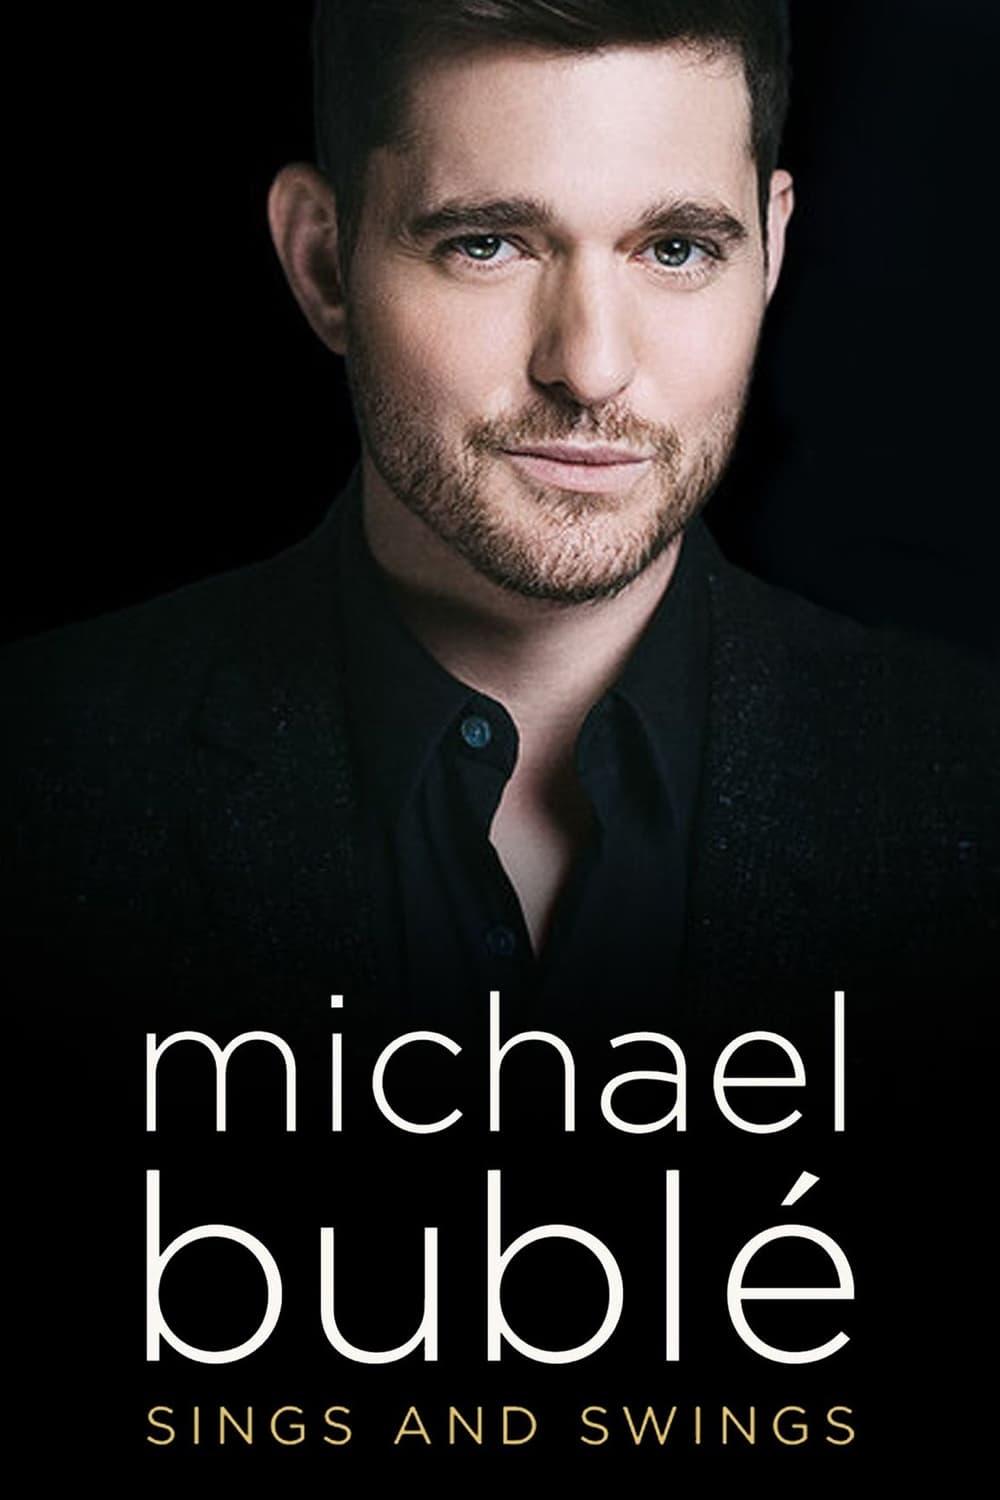 Michael Bublé Sings and Swings poster